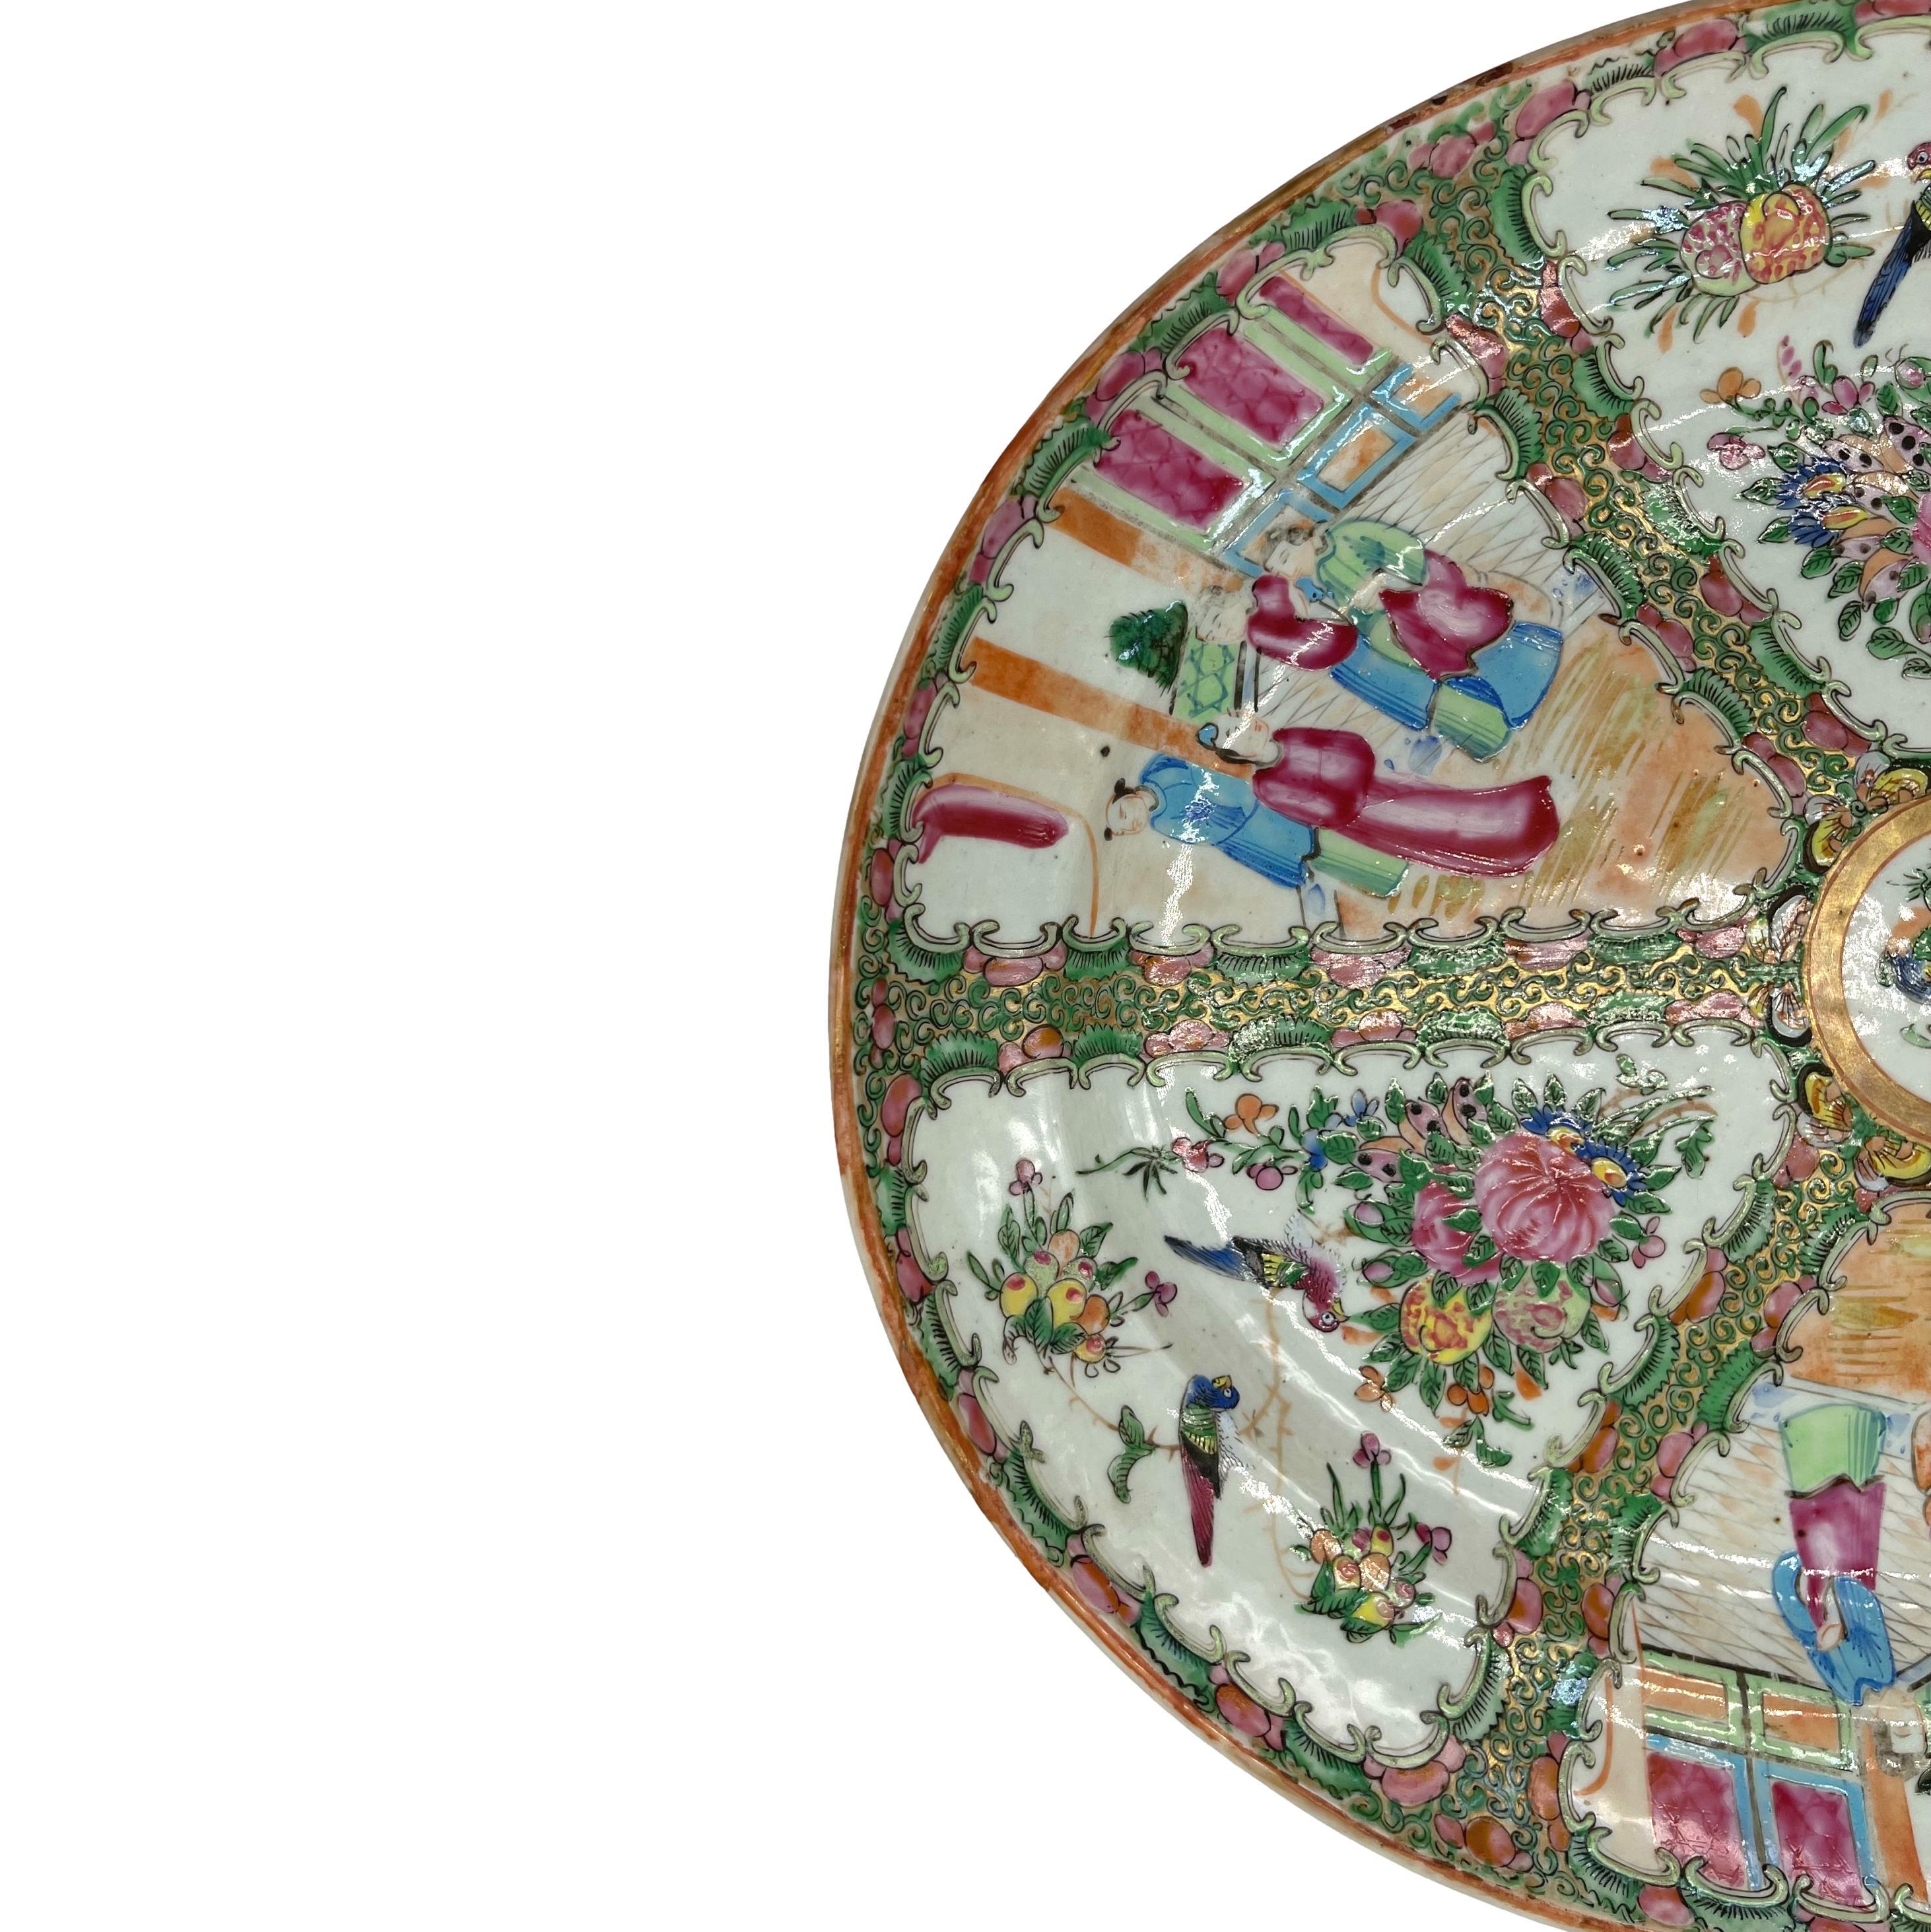 Qing Dynasty Famille Rose Medallion Platter, Canton c. 1880, polychrome enameled glazes on a hard-paste porcelain body, the center medallion with a single multi-colored bird among peonies within a gilded ring surrounded by a band of six butterflies,